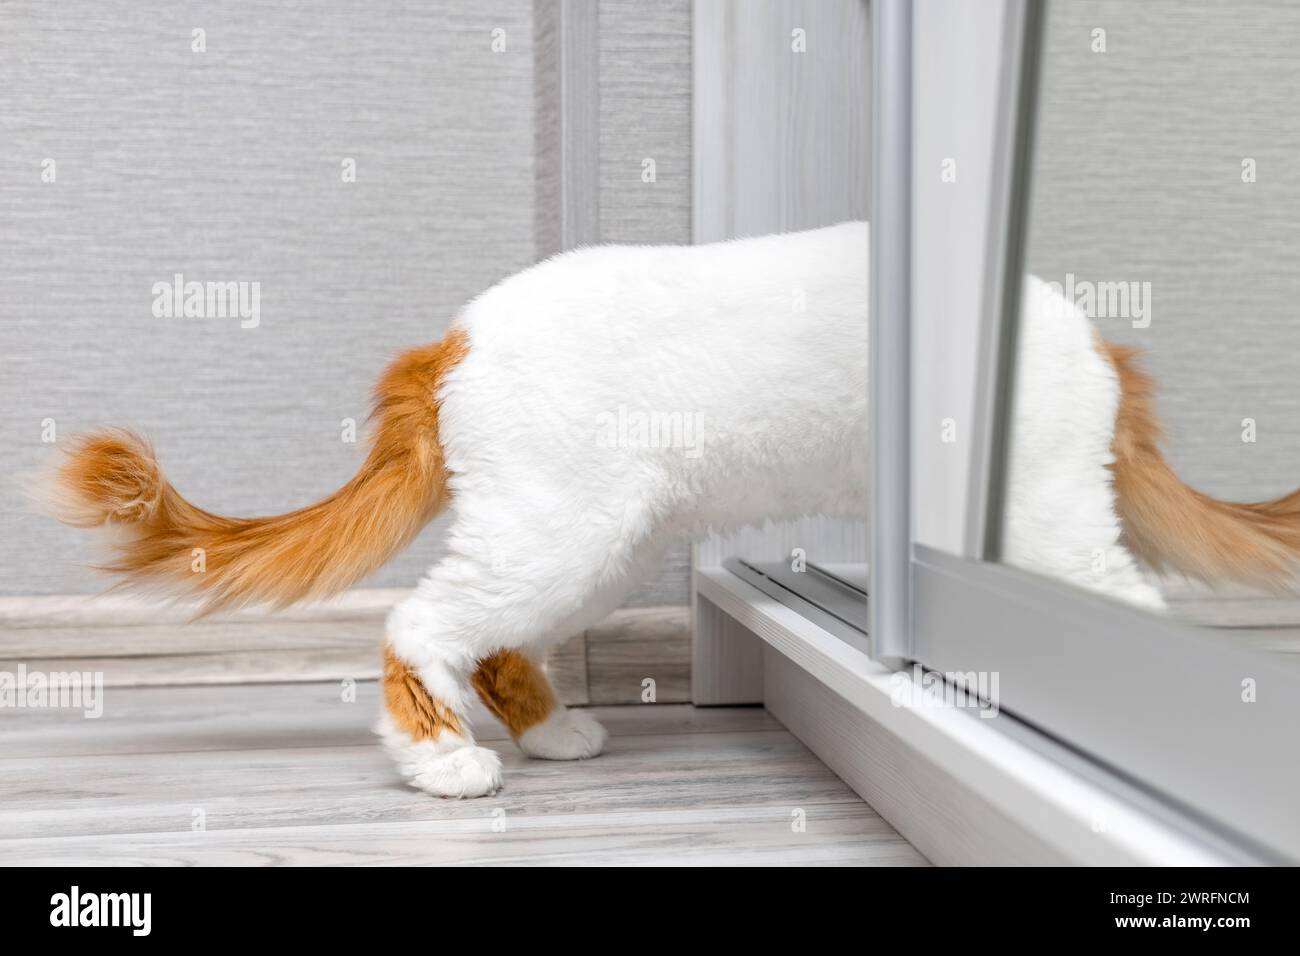 a white cat climbs into a closet compartment. curious cat. cat's tail sticks out from behind the door. cat hiding from people in the closet. High qual Stock Photo